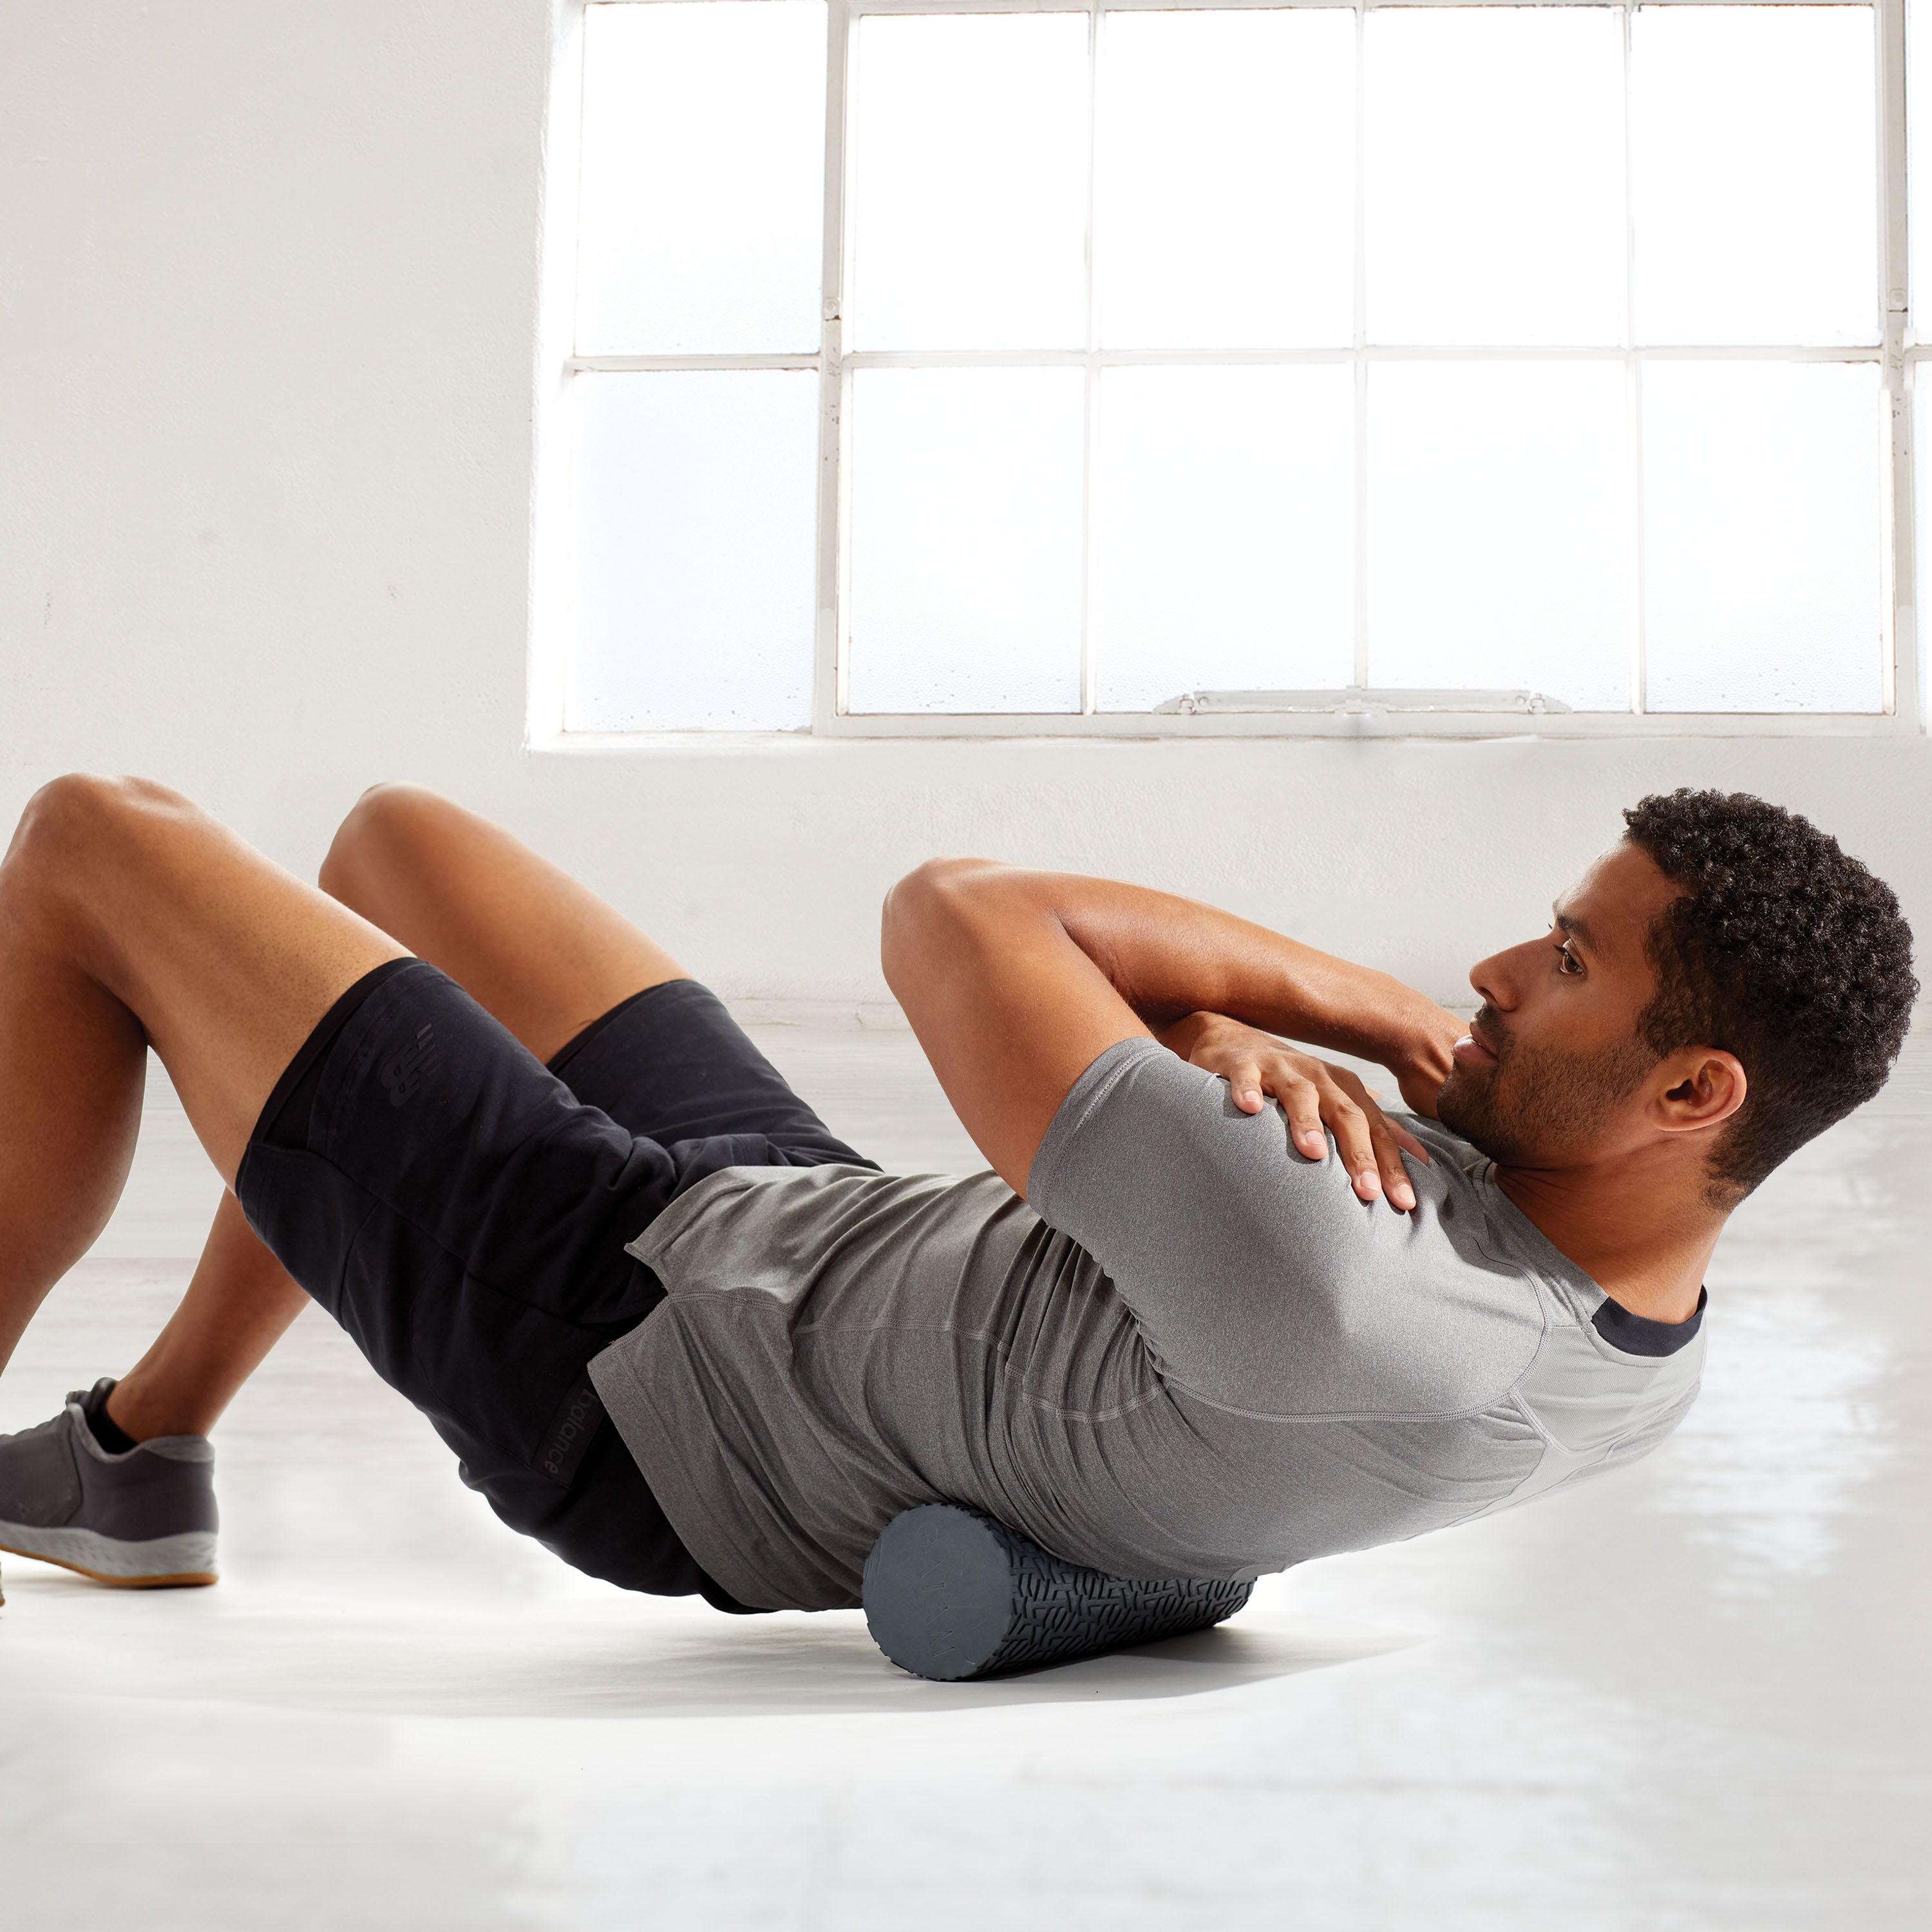 Person on ground with Restore Compact Textured Foam Roller under lower back to help massage 